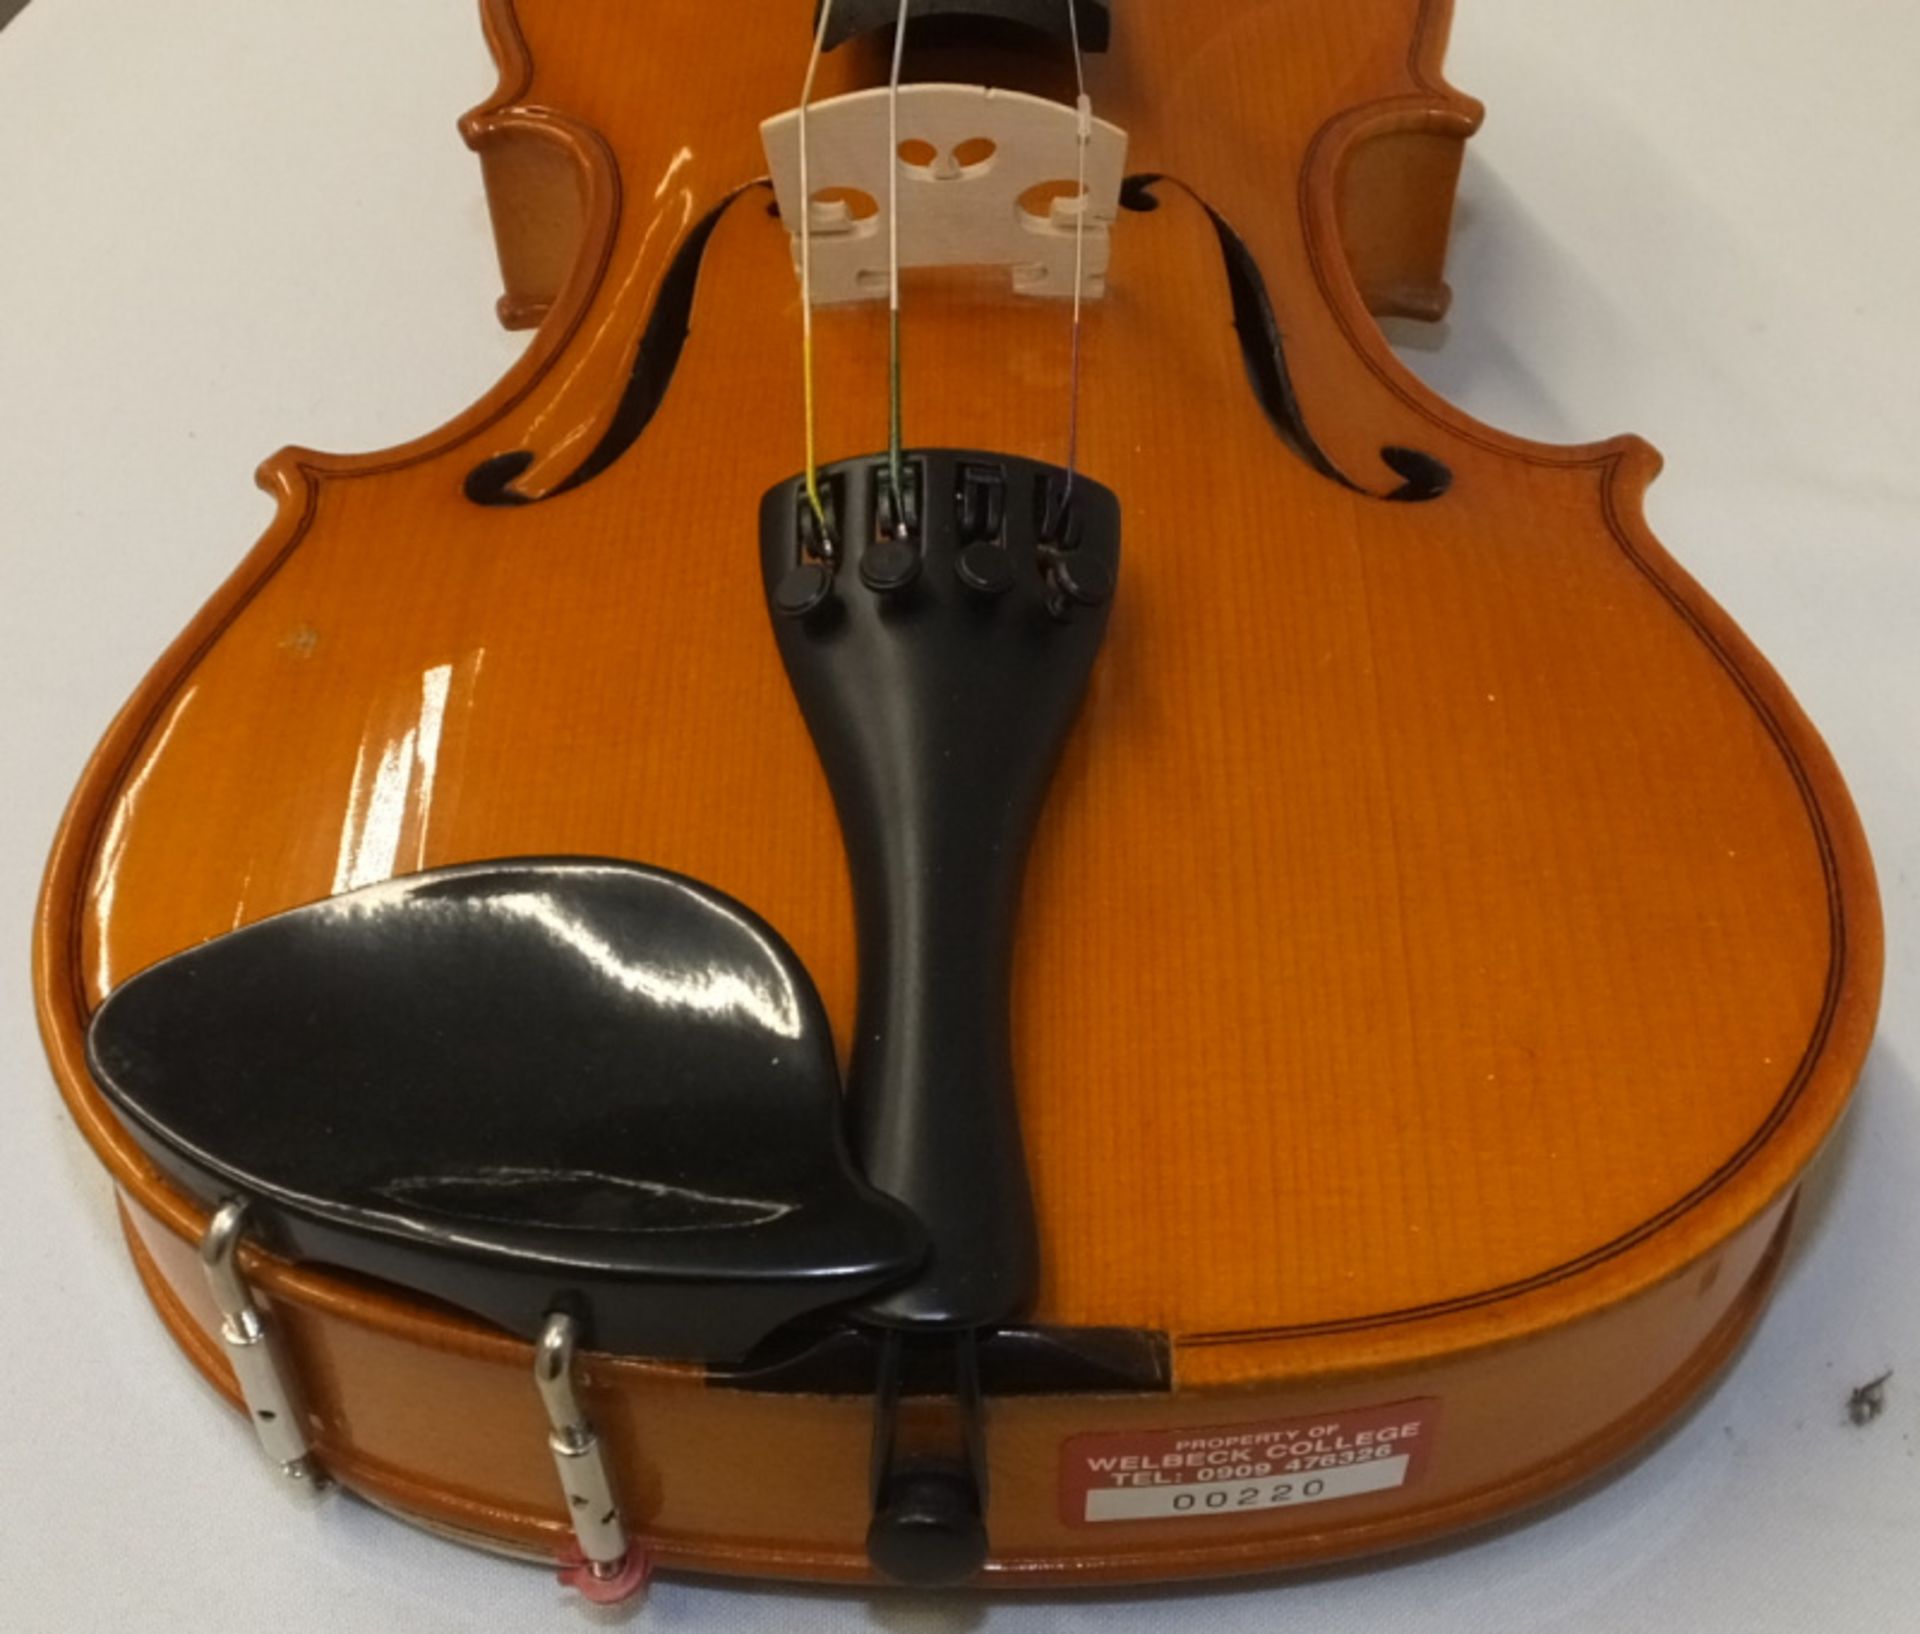 Andreas Zeller Violin (missing string) & Case - Please check photos carefully - Image 4 of 17